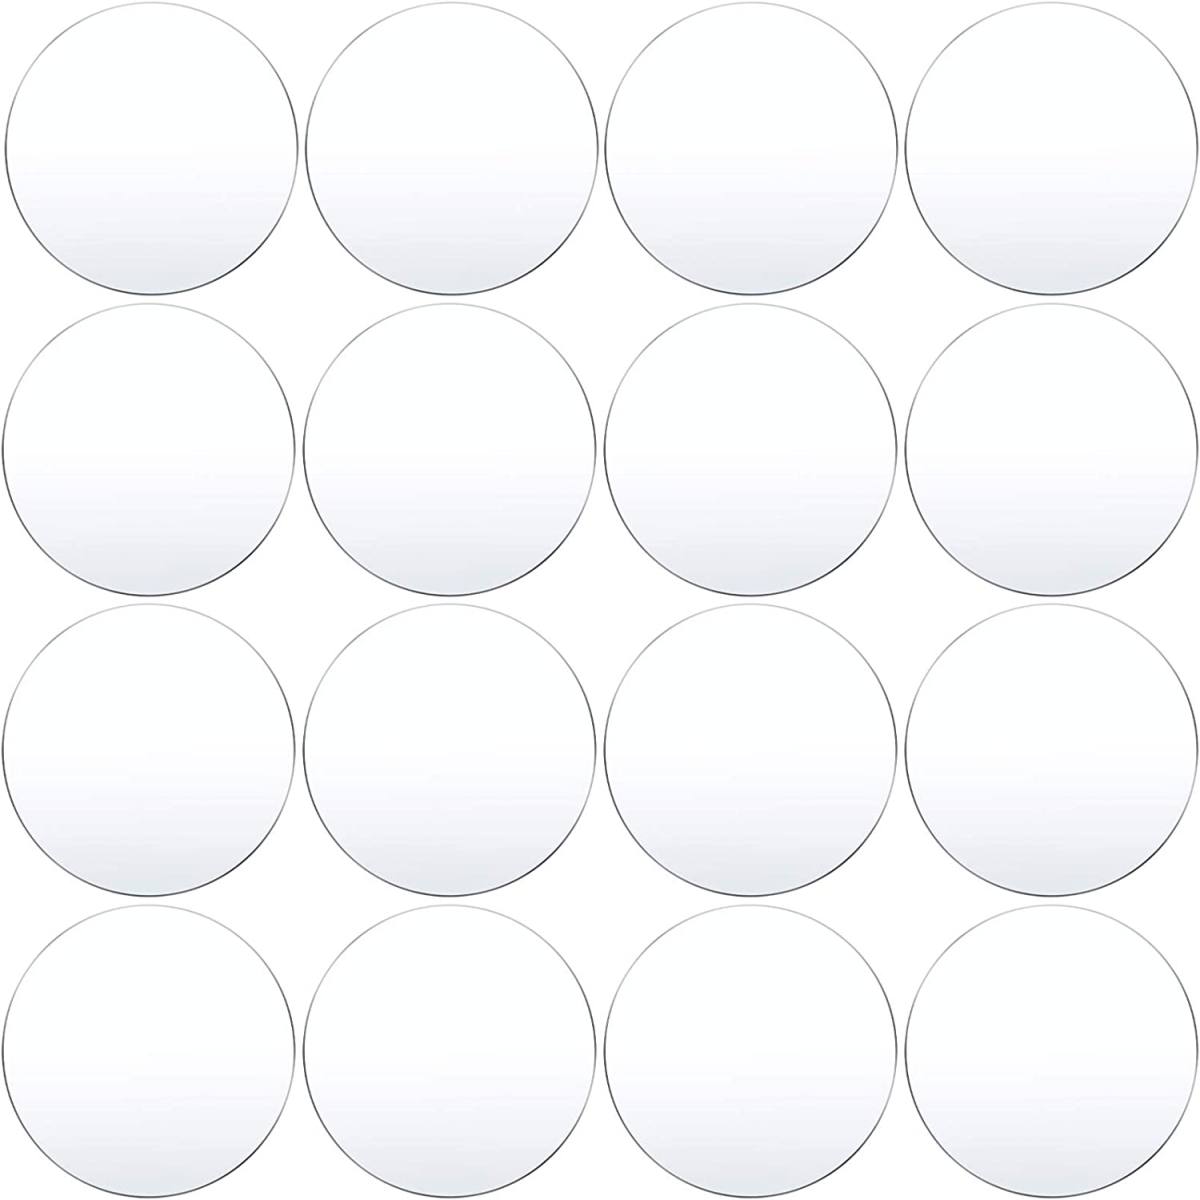 Circle Clear Acrylic Sheet, 12 x 12 Inches Round Acrylic Disc 1/16 Inches  Thick Transparent Acrylic Panel for DIY Projects and Crafts (2 Pieces)